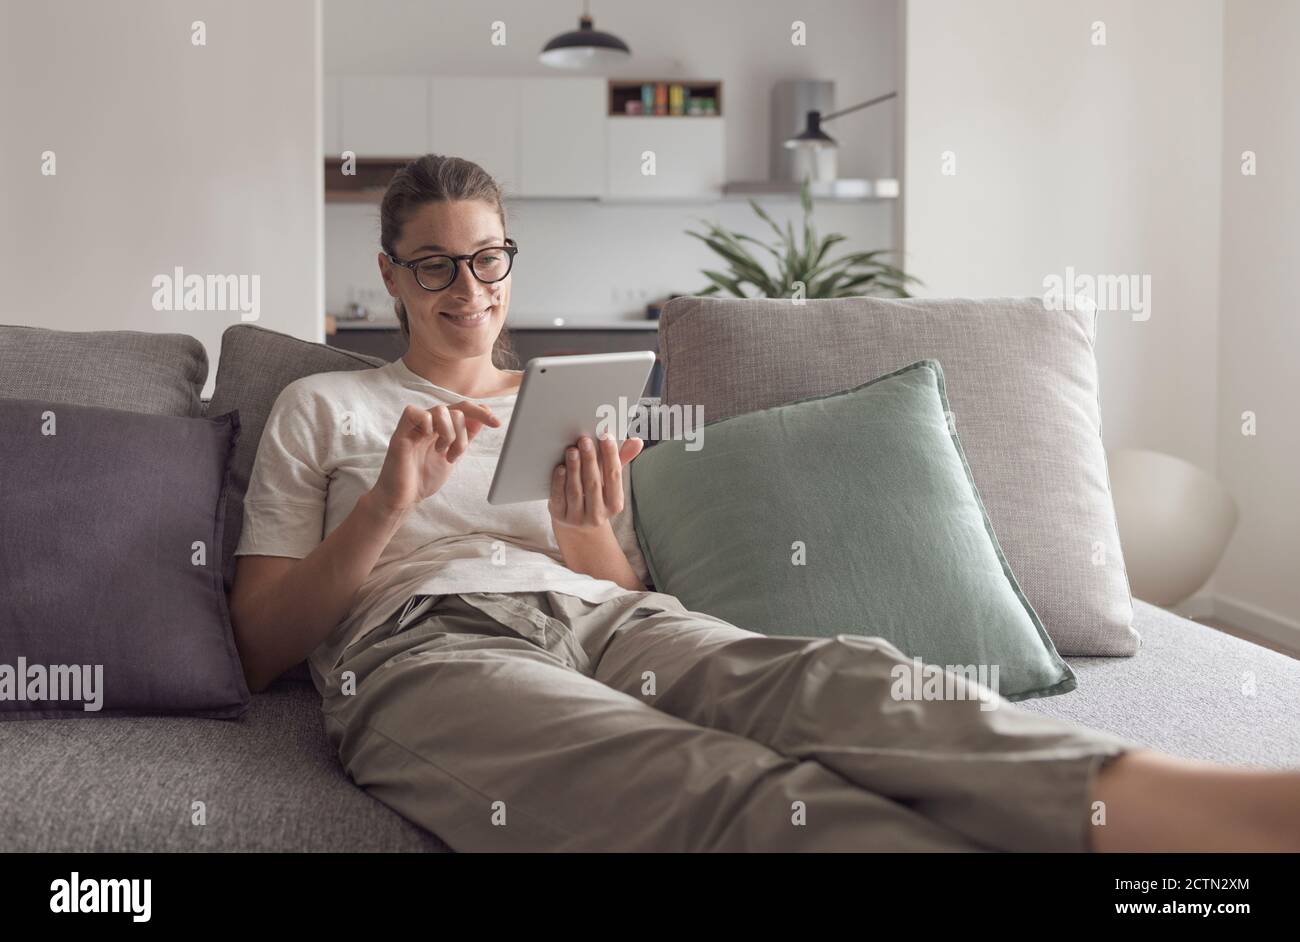 Woman relaxing on the sofa and connecting with her tablet in the living room Stock Photo